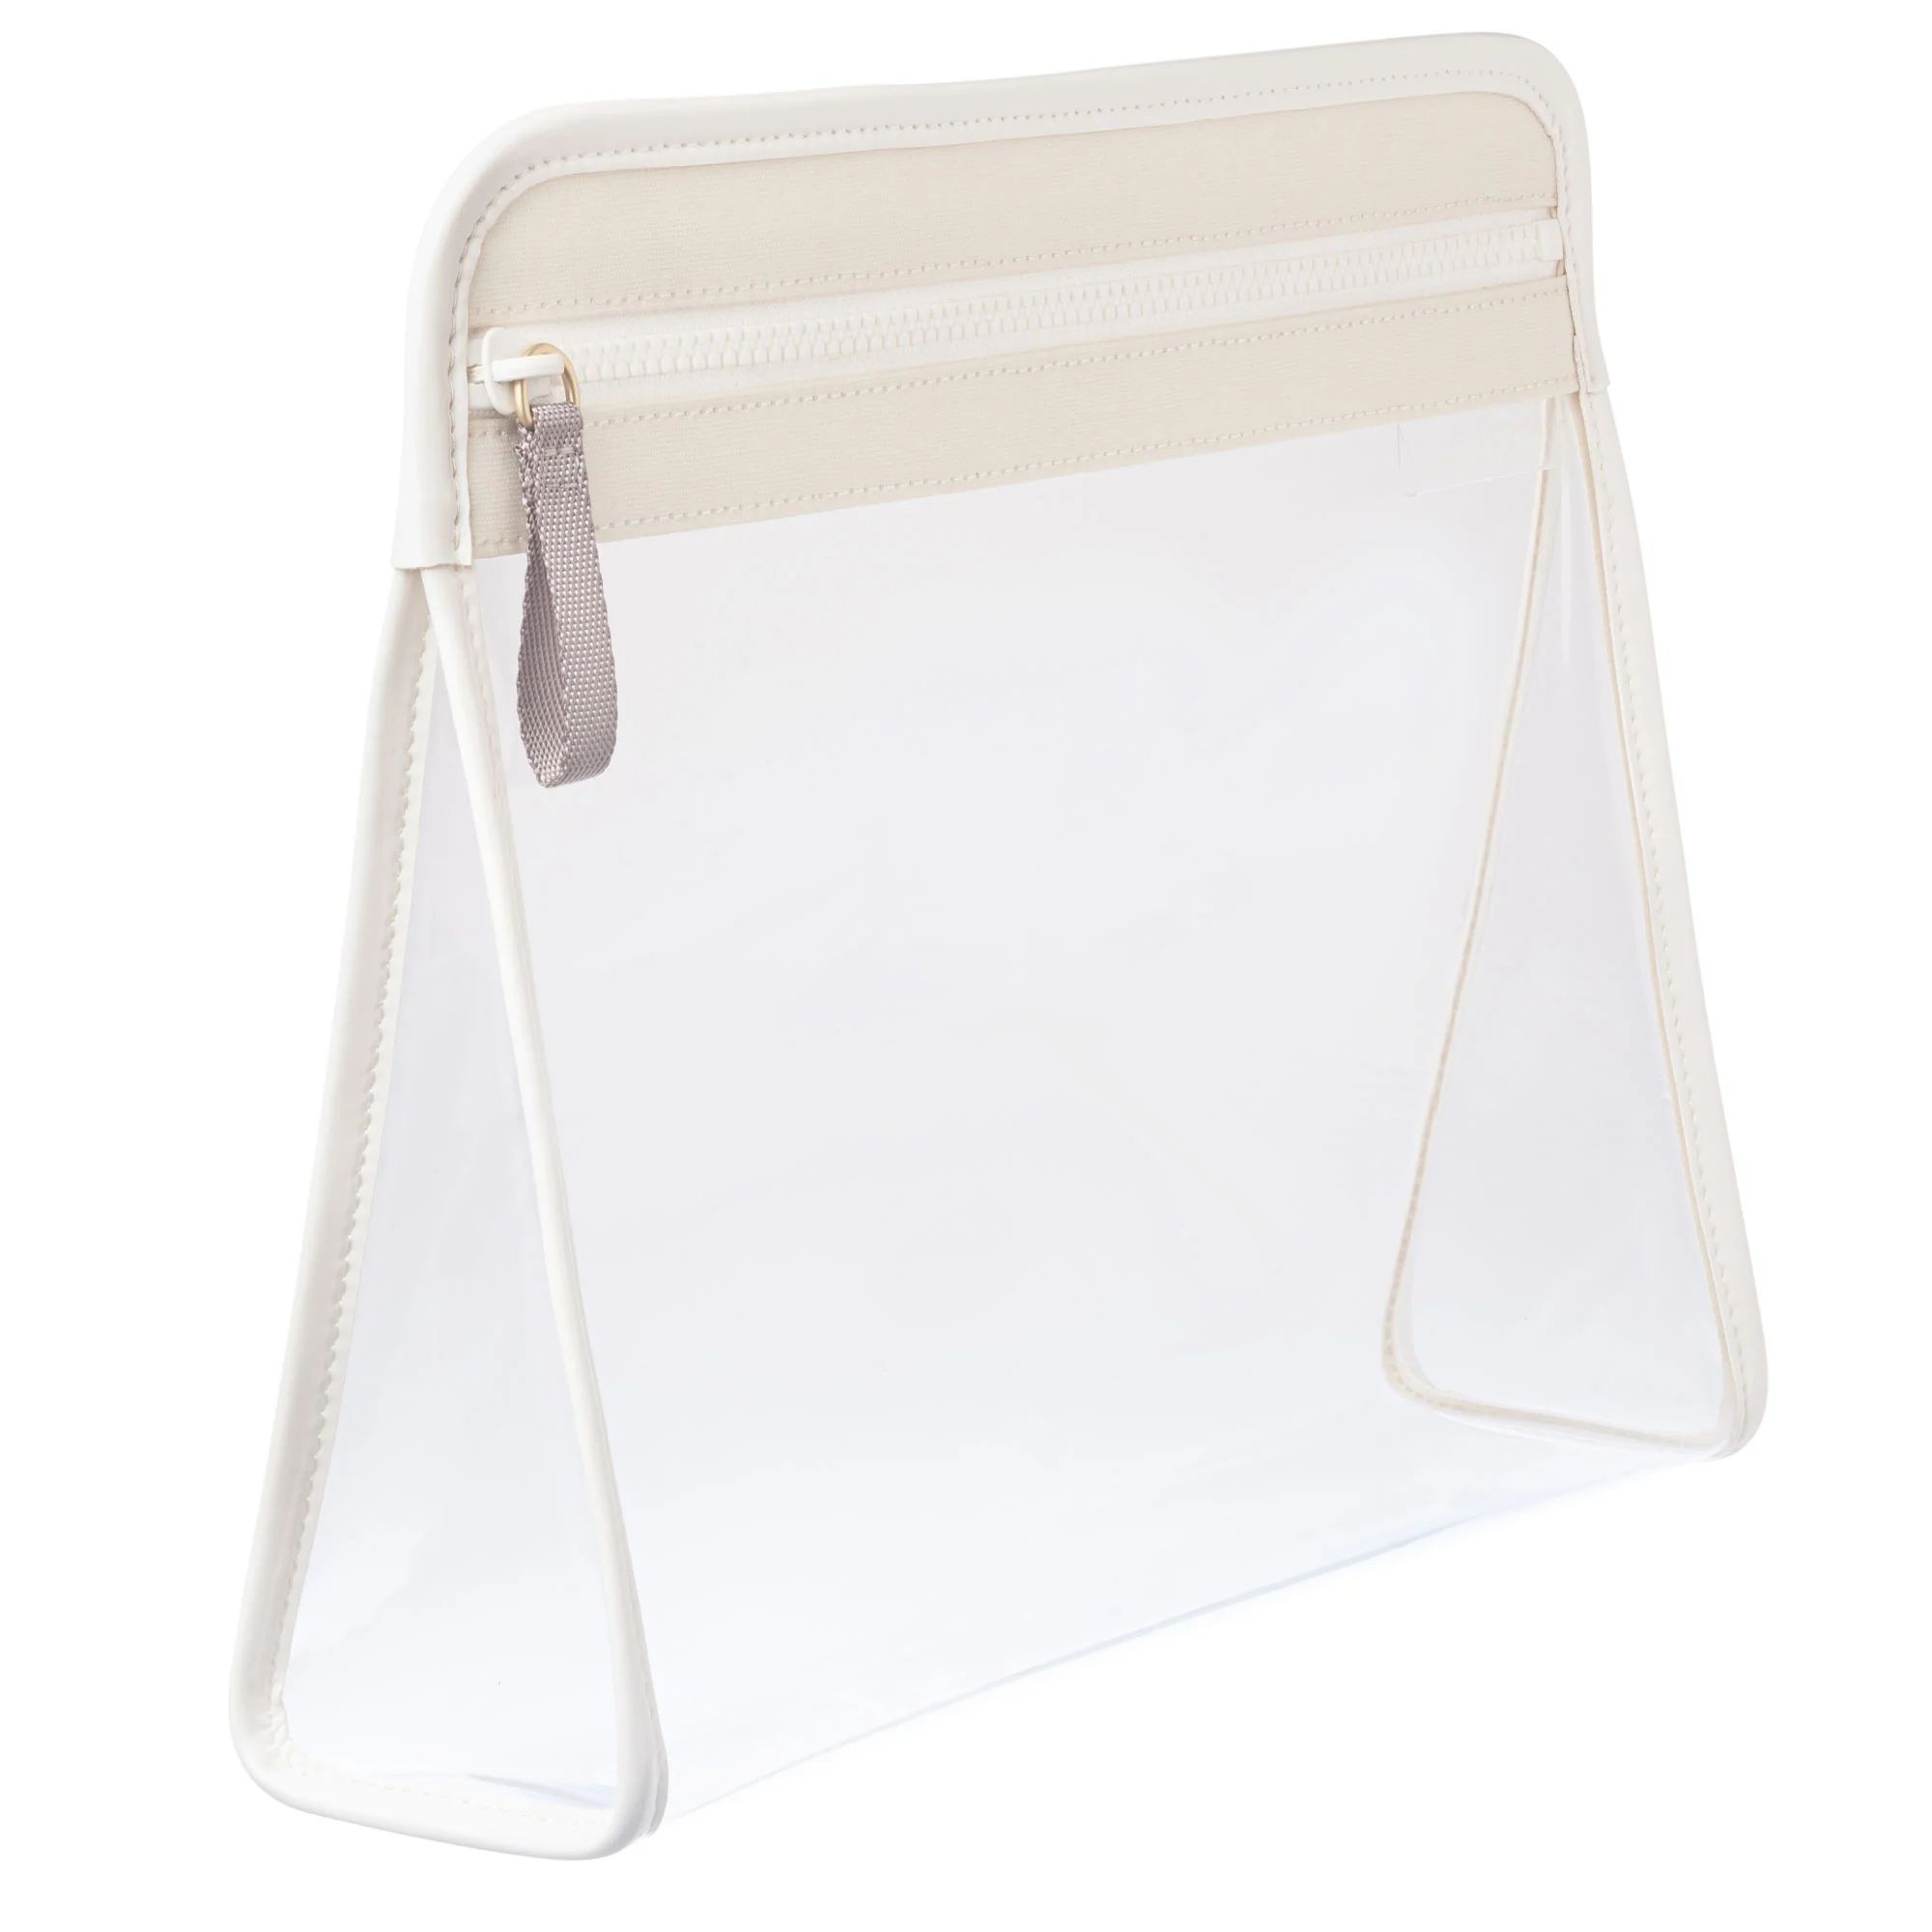 Clarity Pouch Large | TRUFFLE